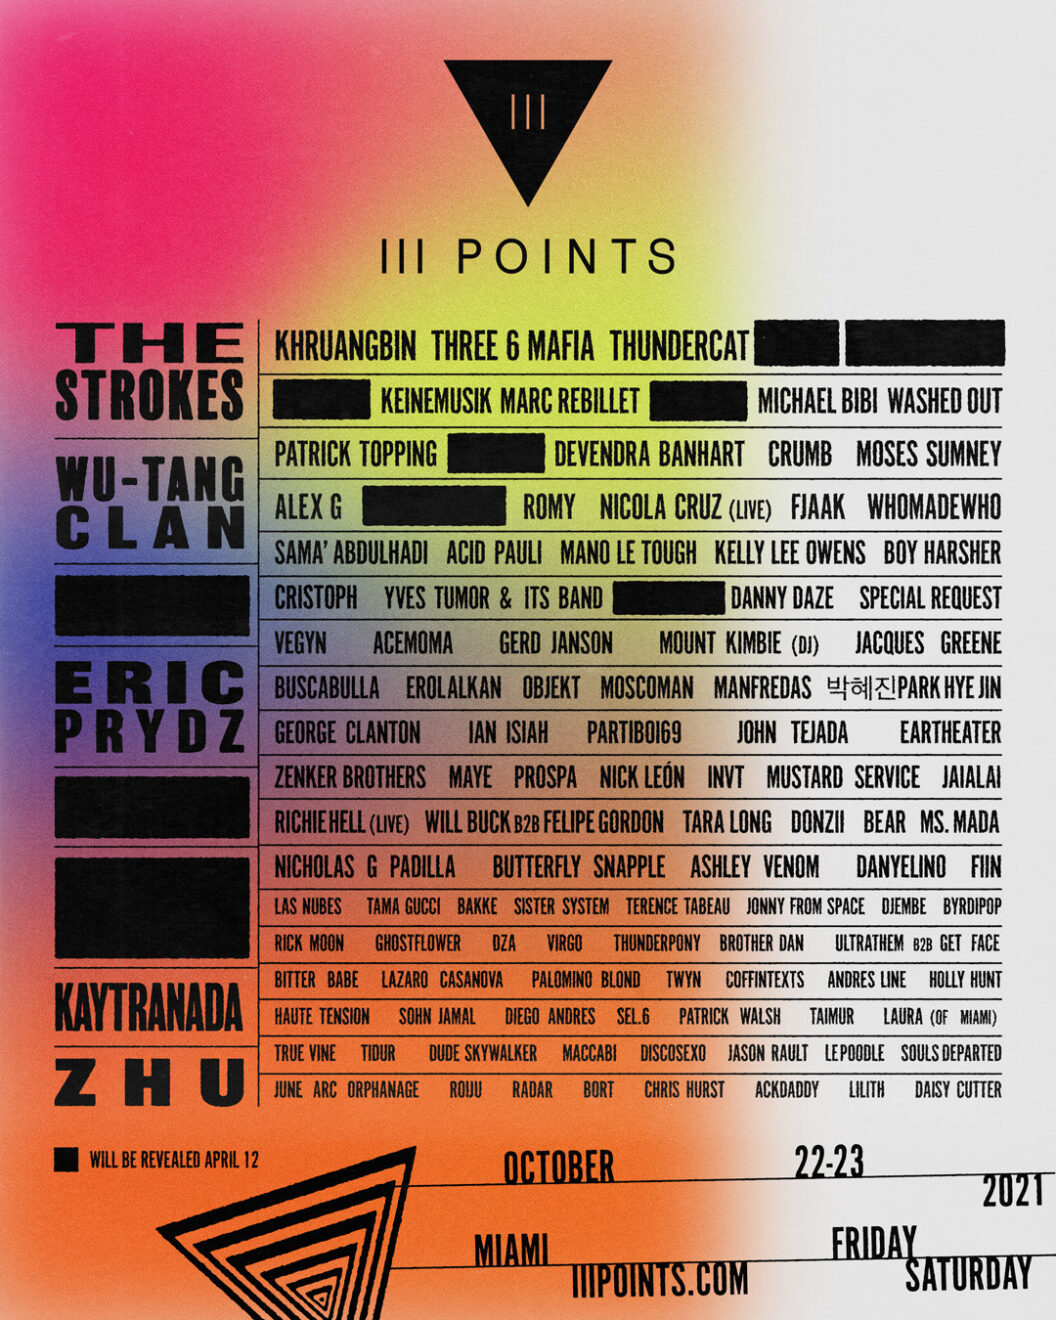 Festival III Points Miami, Fla. tickets and lineup on Oct 21, 2022